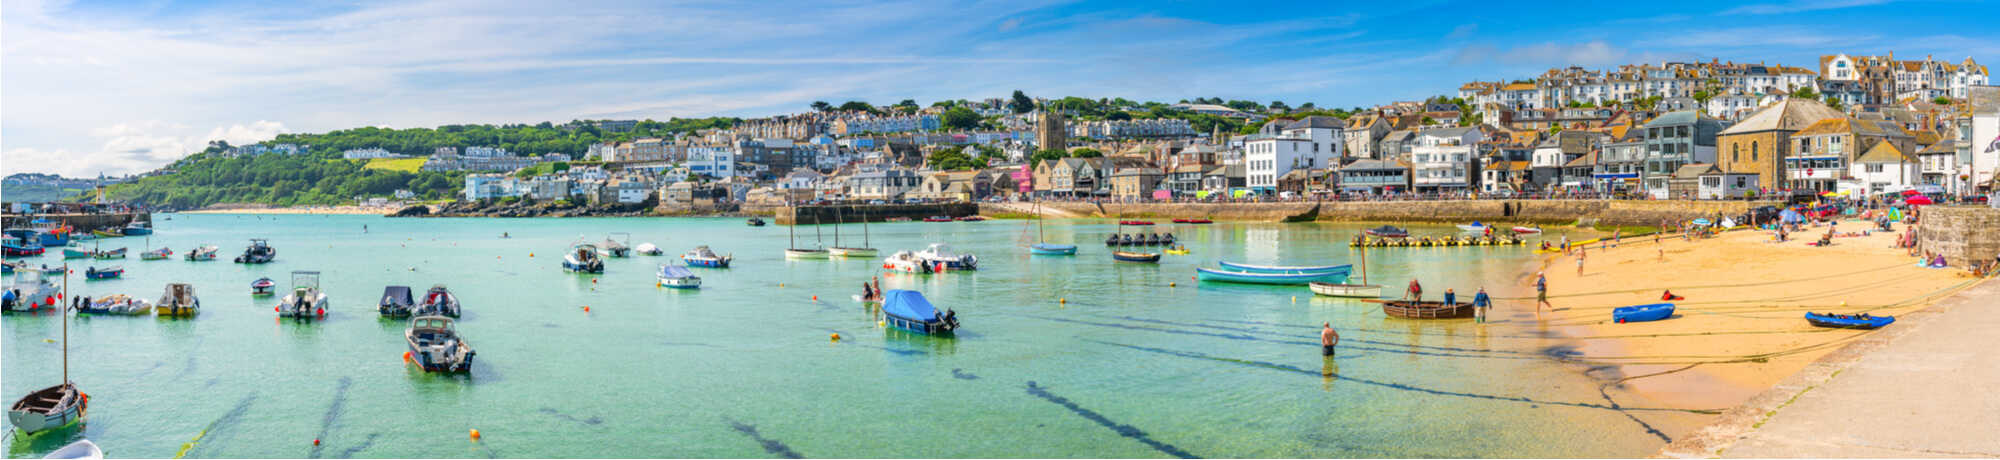 st-ives-harbour-cornwall